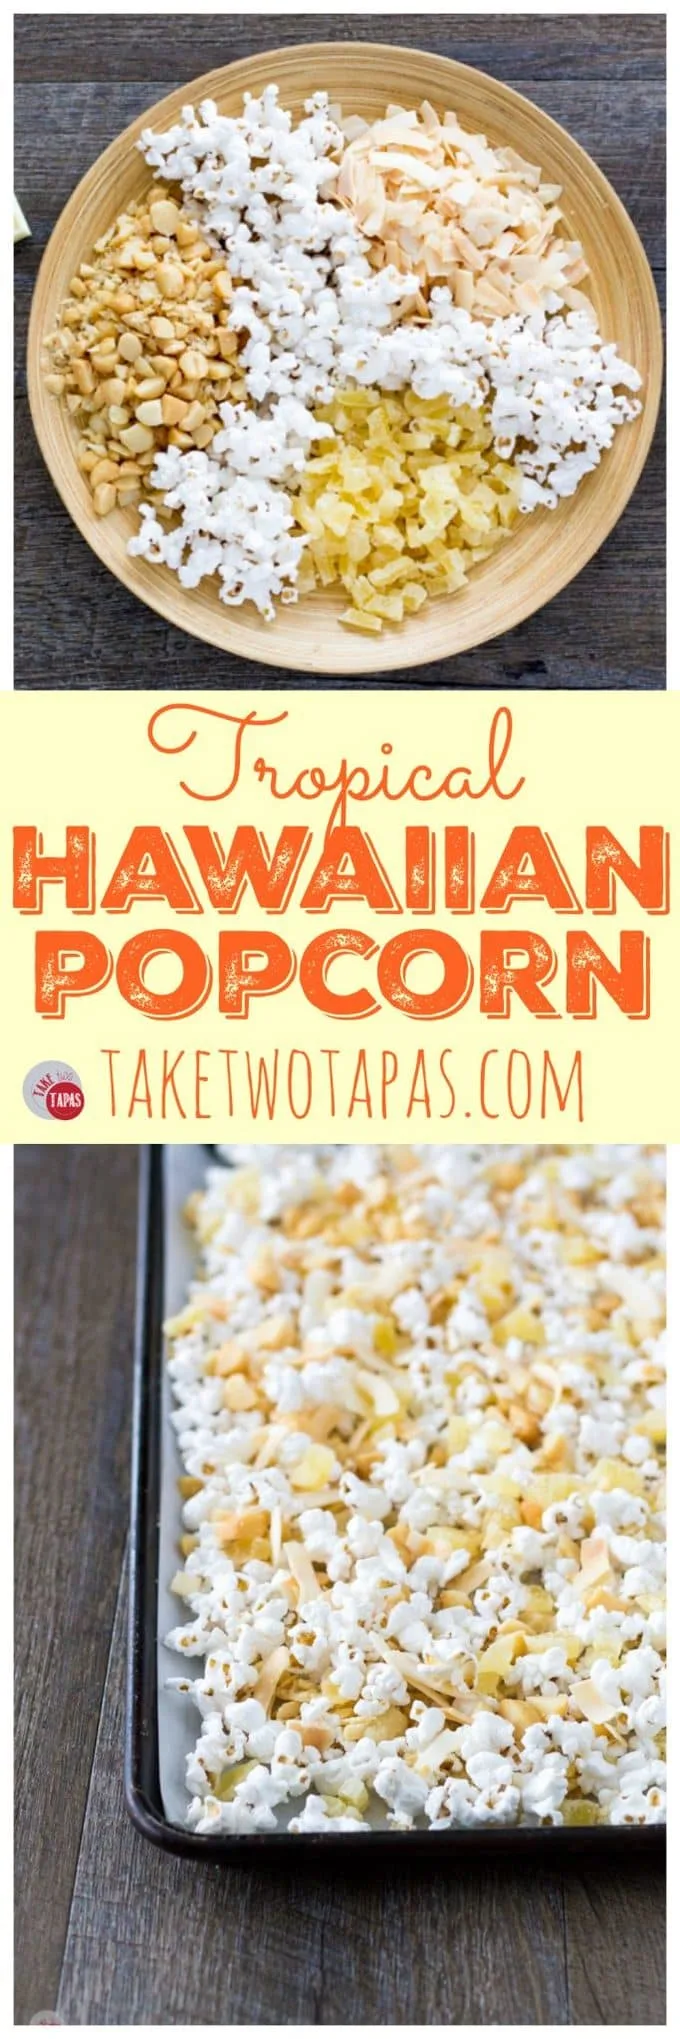 Pinterest collage with text "tropical Hawaiian popcorn"